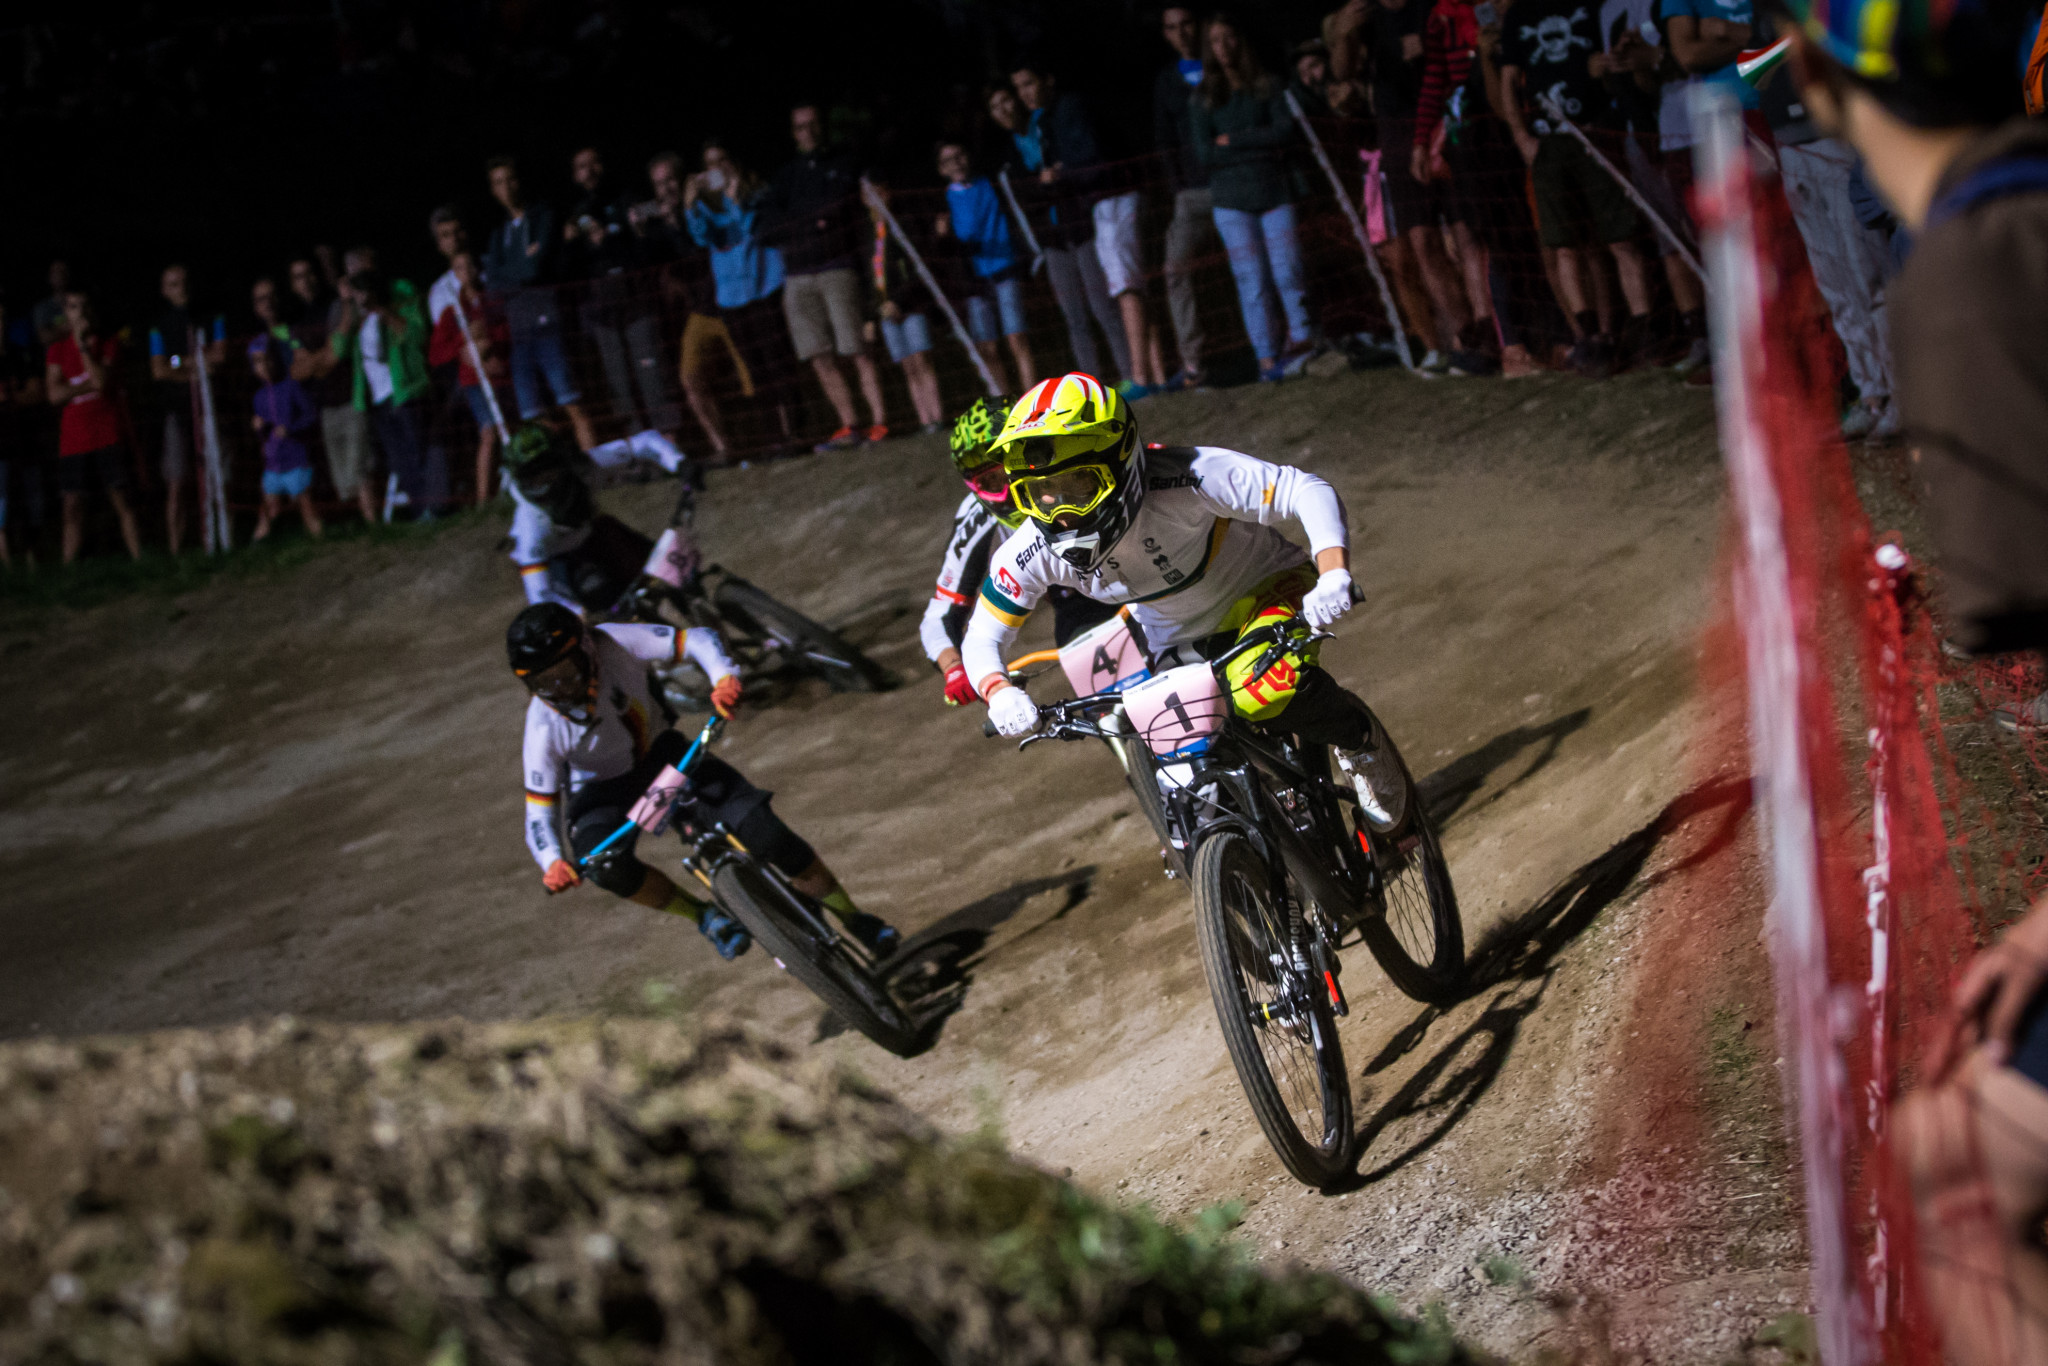 Romana Labounková and Quentin Derbier are set to defend their titles at the UCI Mountain Bike 4X World Championships that start in Val di Sole in Italy tomorrow ©Getty Images